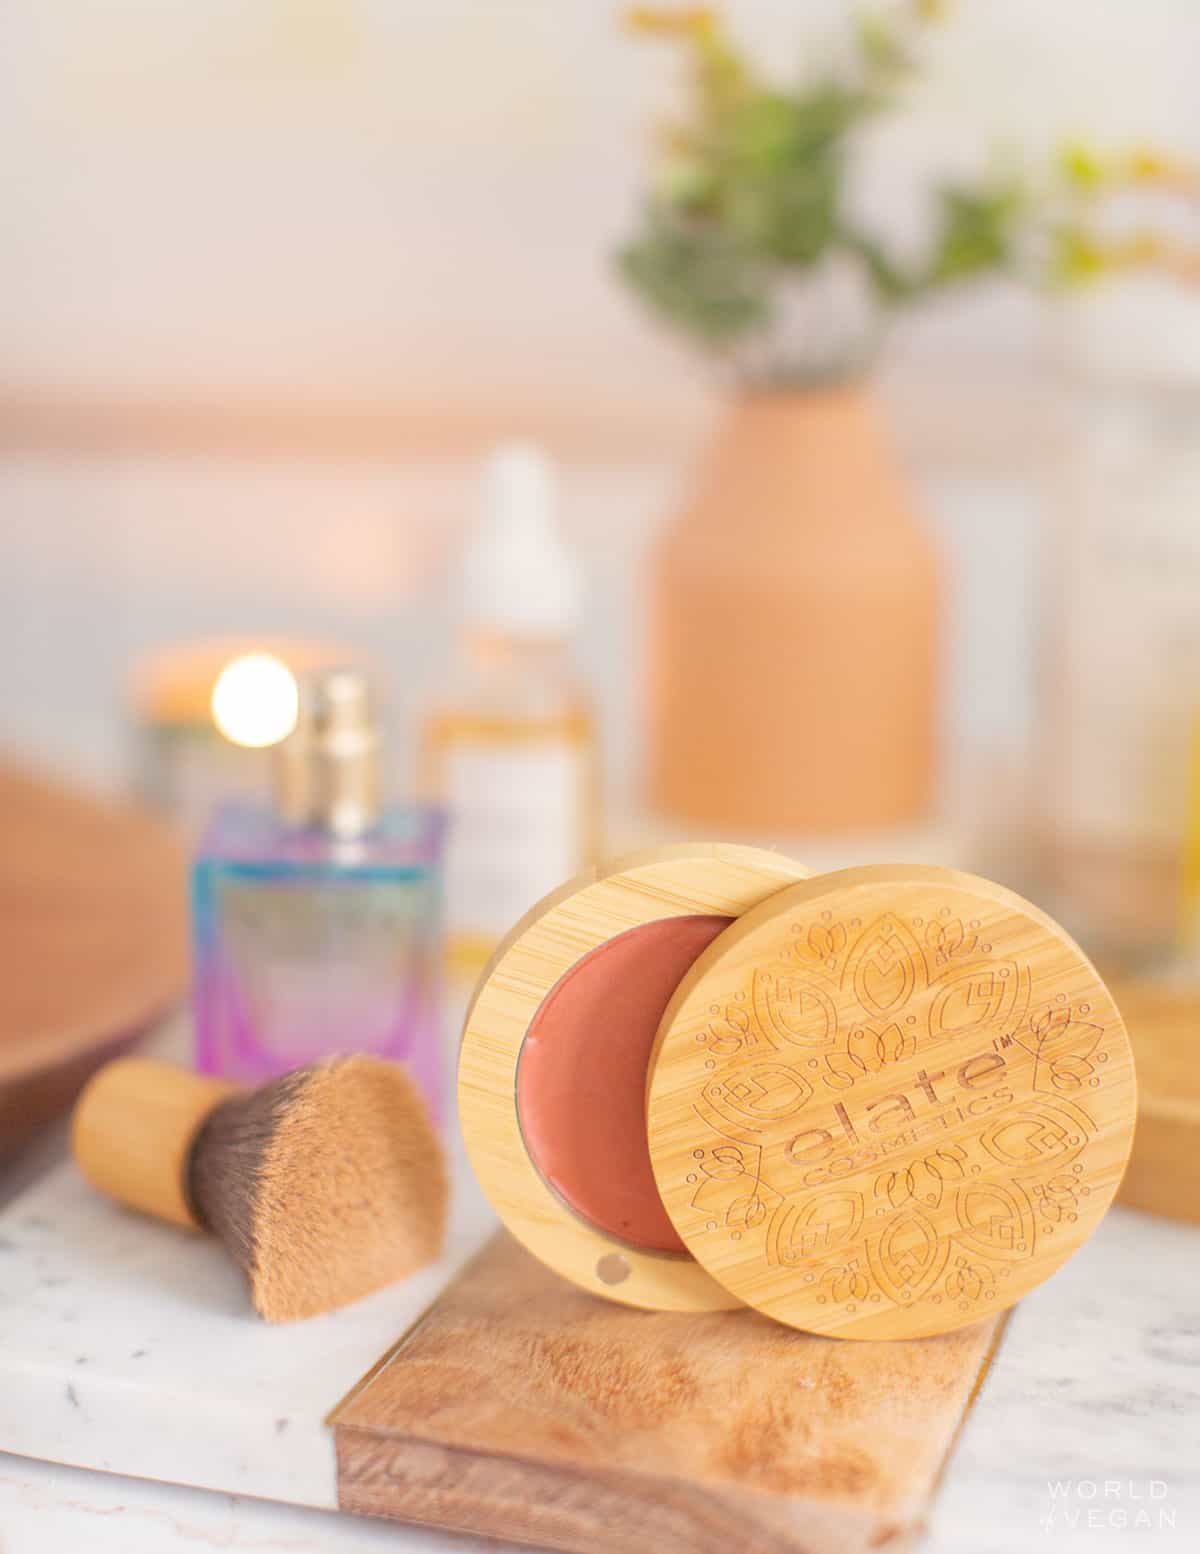 Elate Cosmetics blush surrounded by other vegan makeup products and brands. 